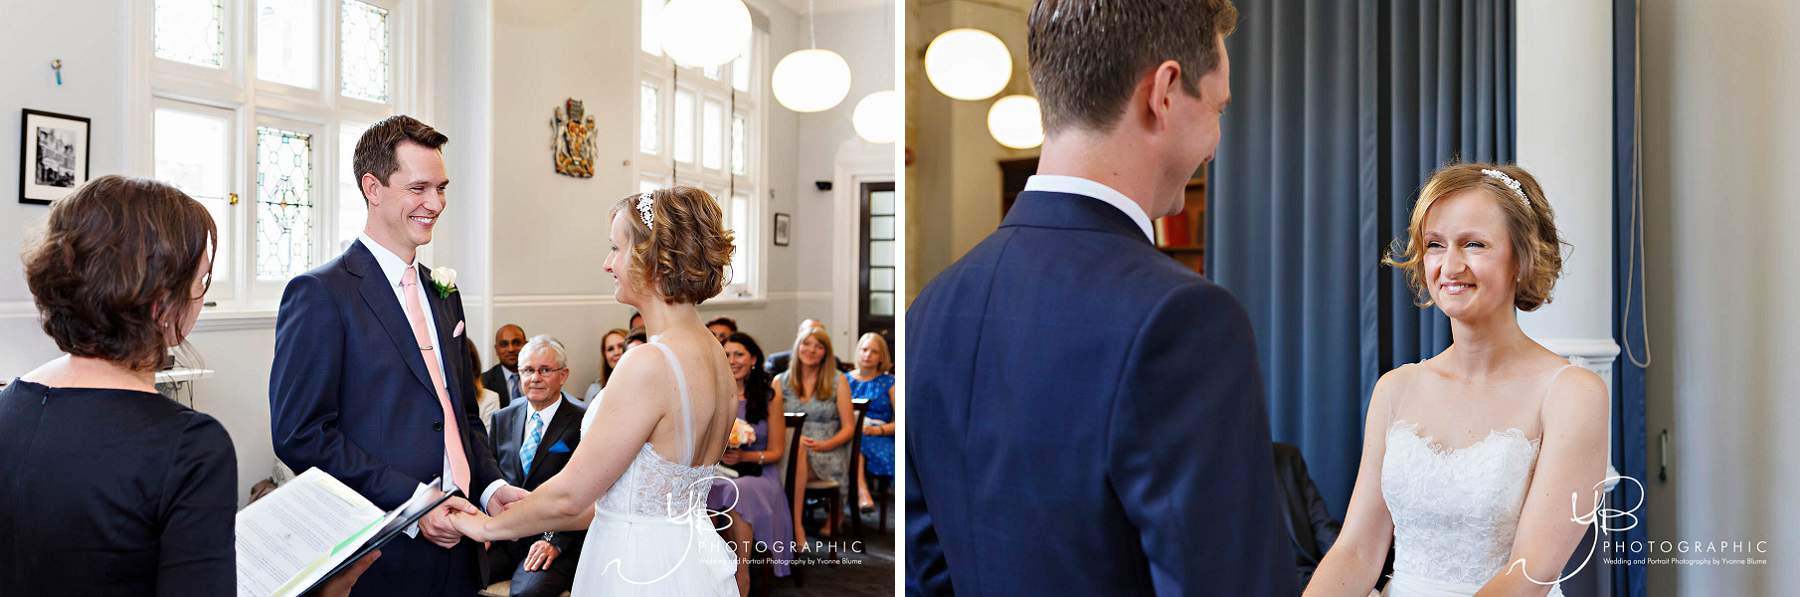 Civil wedding ceremony in the Mayfair Room at Mayfair Library